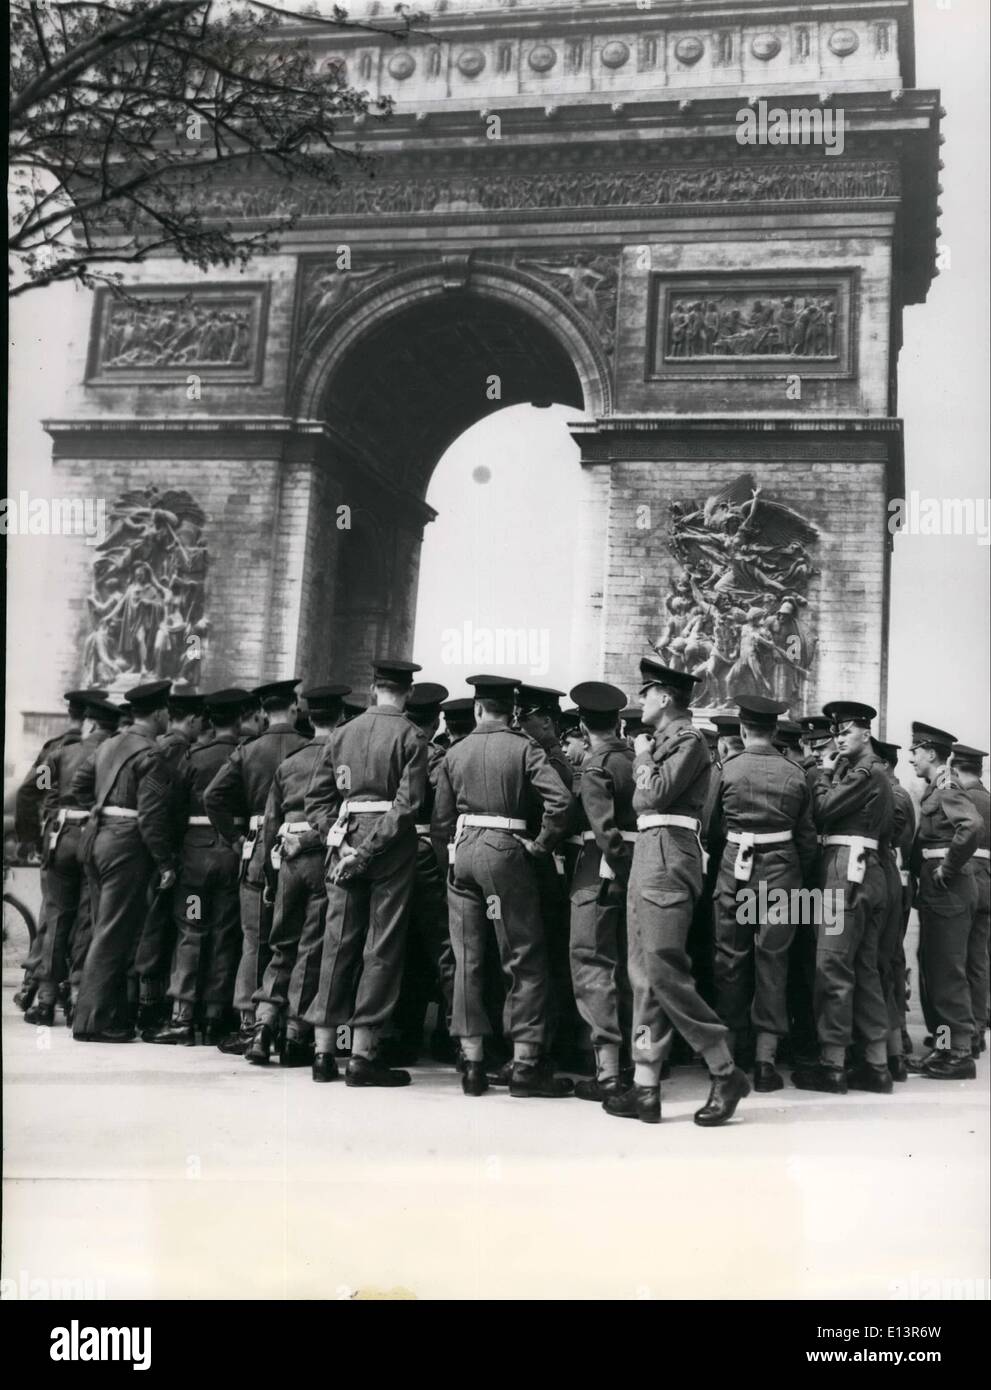 Mar. 22, 2012 - The English soldiers who will participate in the French-British military festival were seen sightseeing in Paris today. Ops.: They are shown here at the Arc de Stock Photo